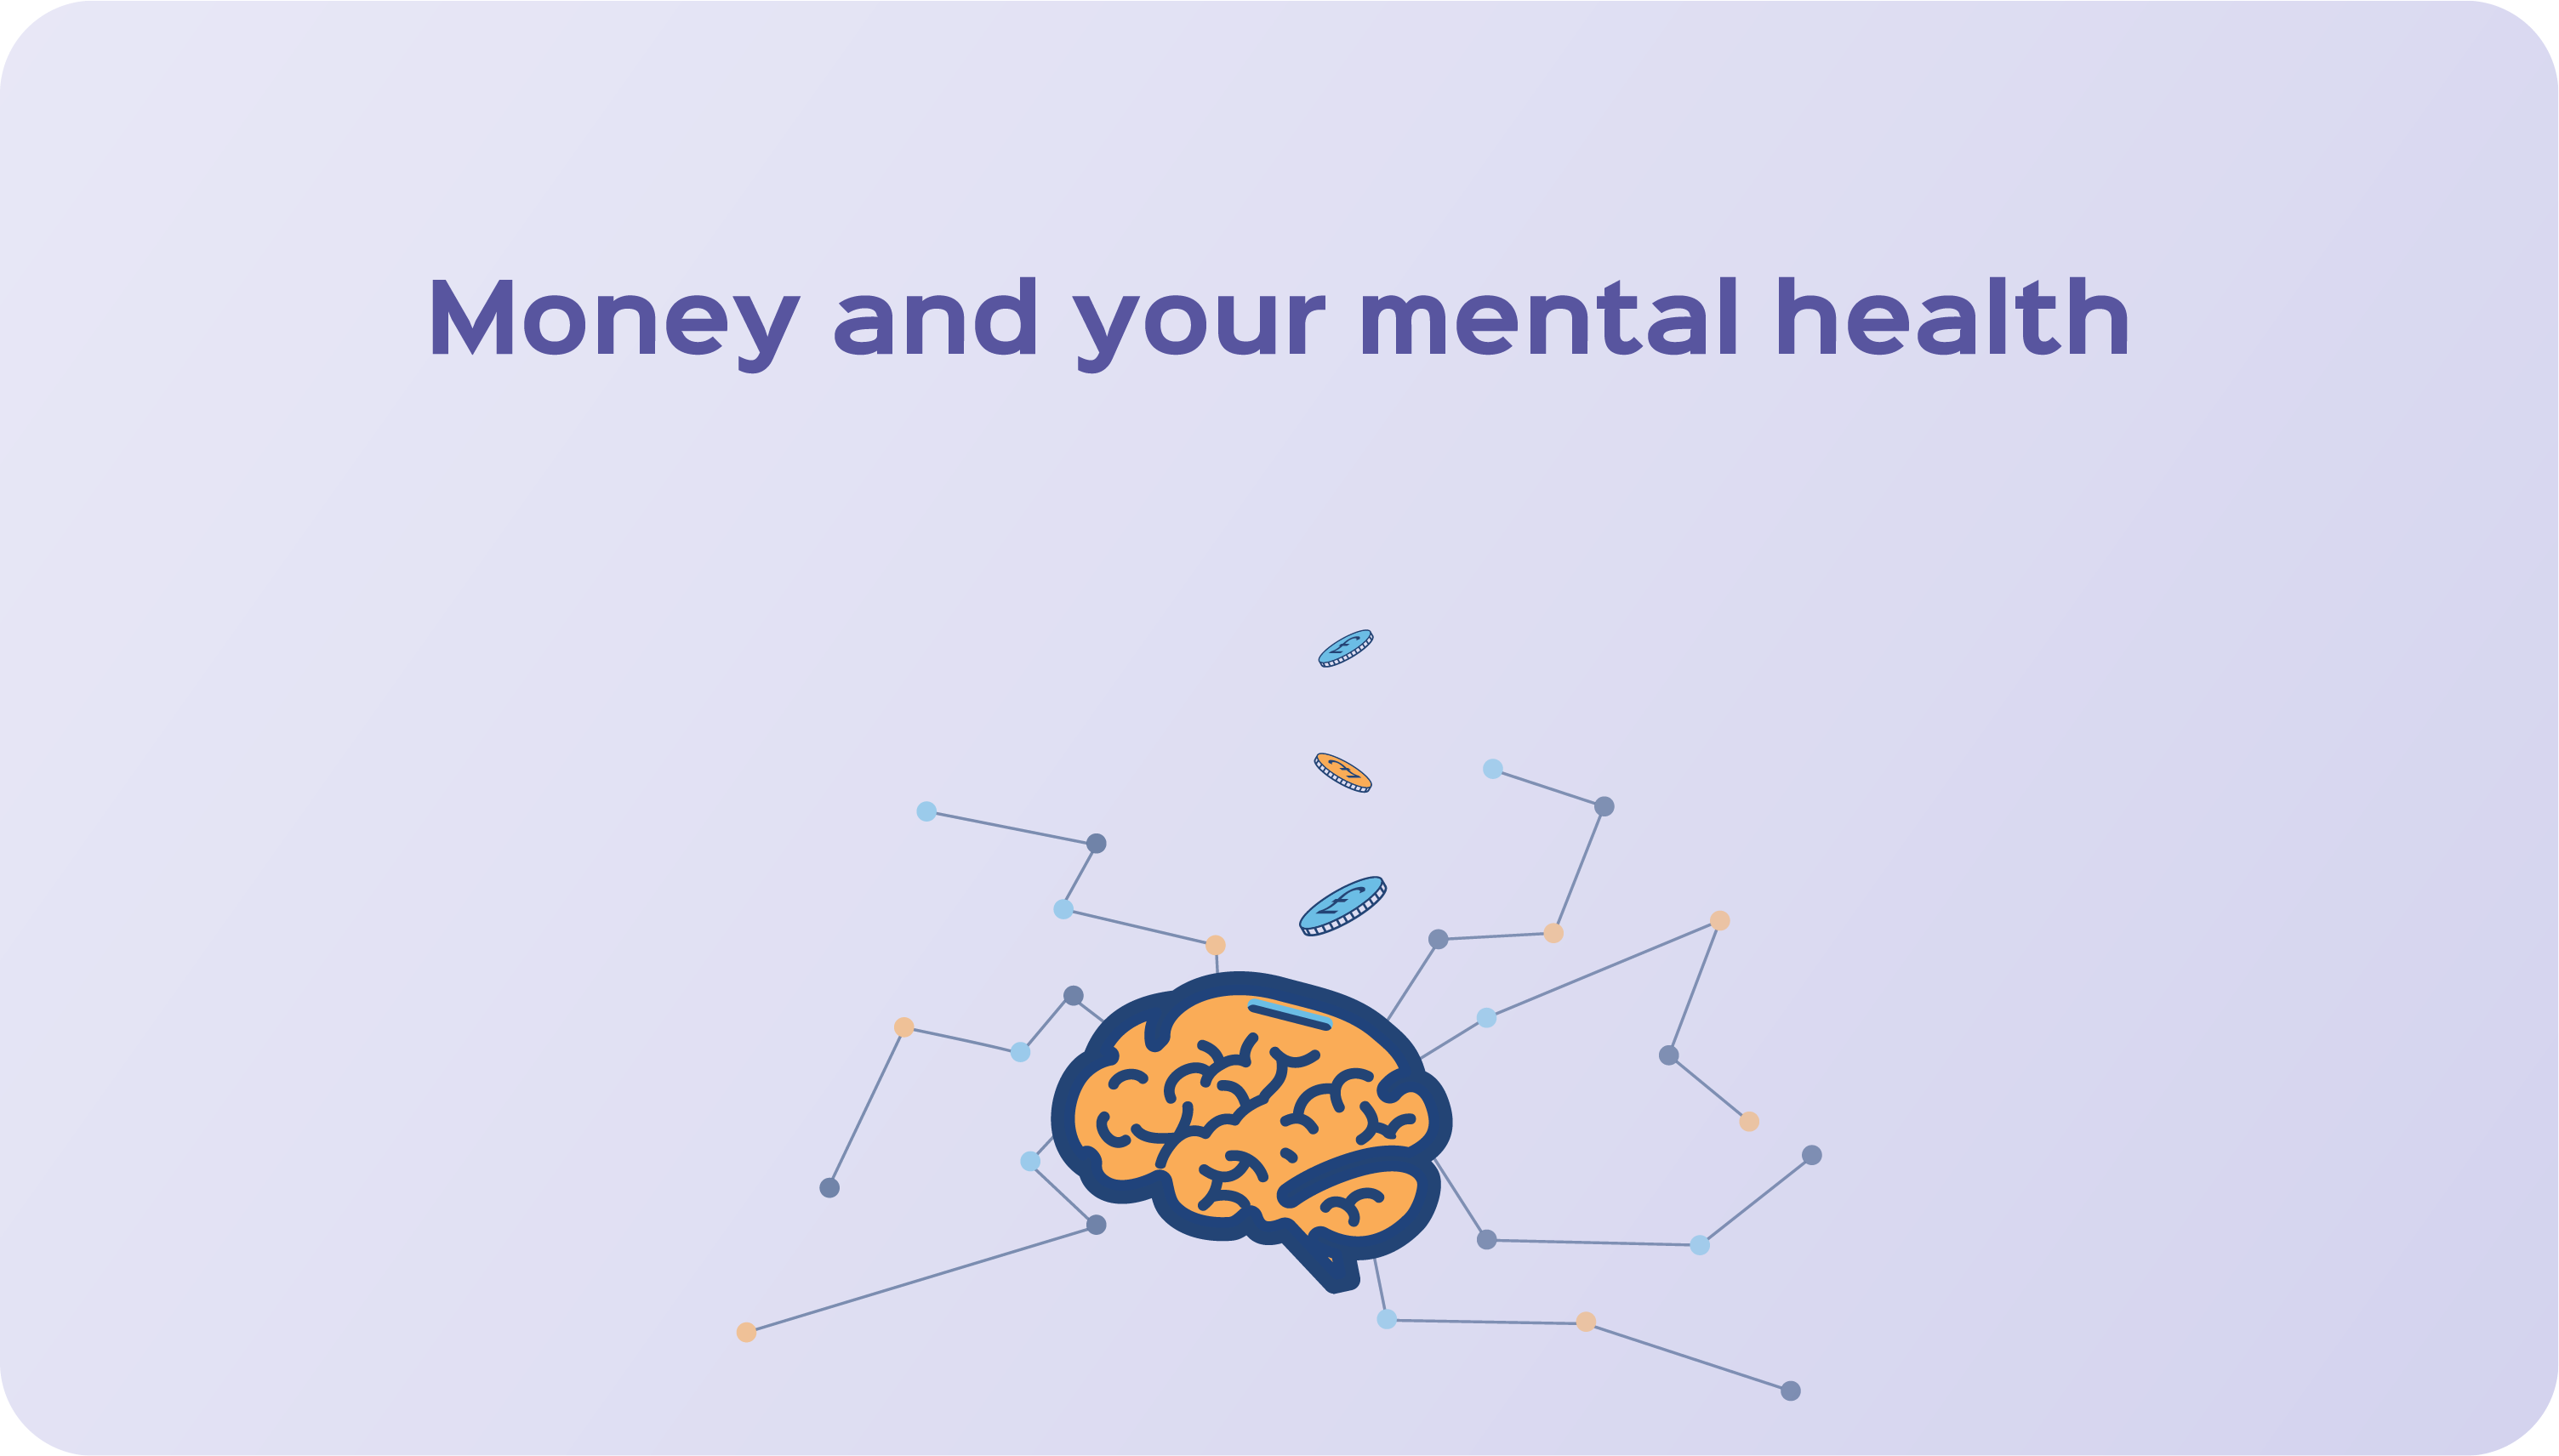 Just how linked are money and mental wellbeing?